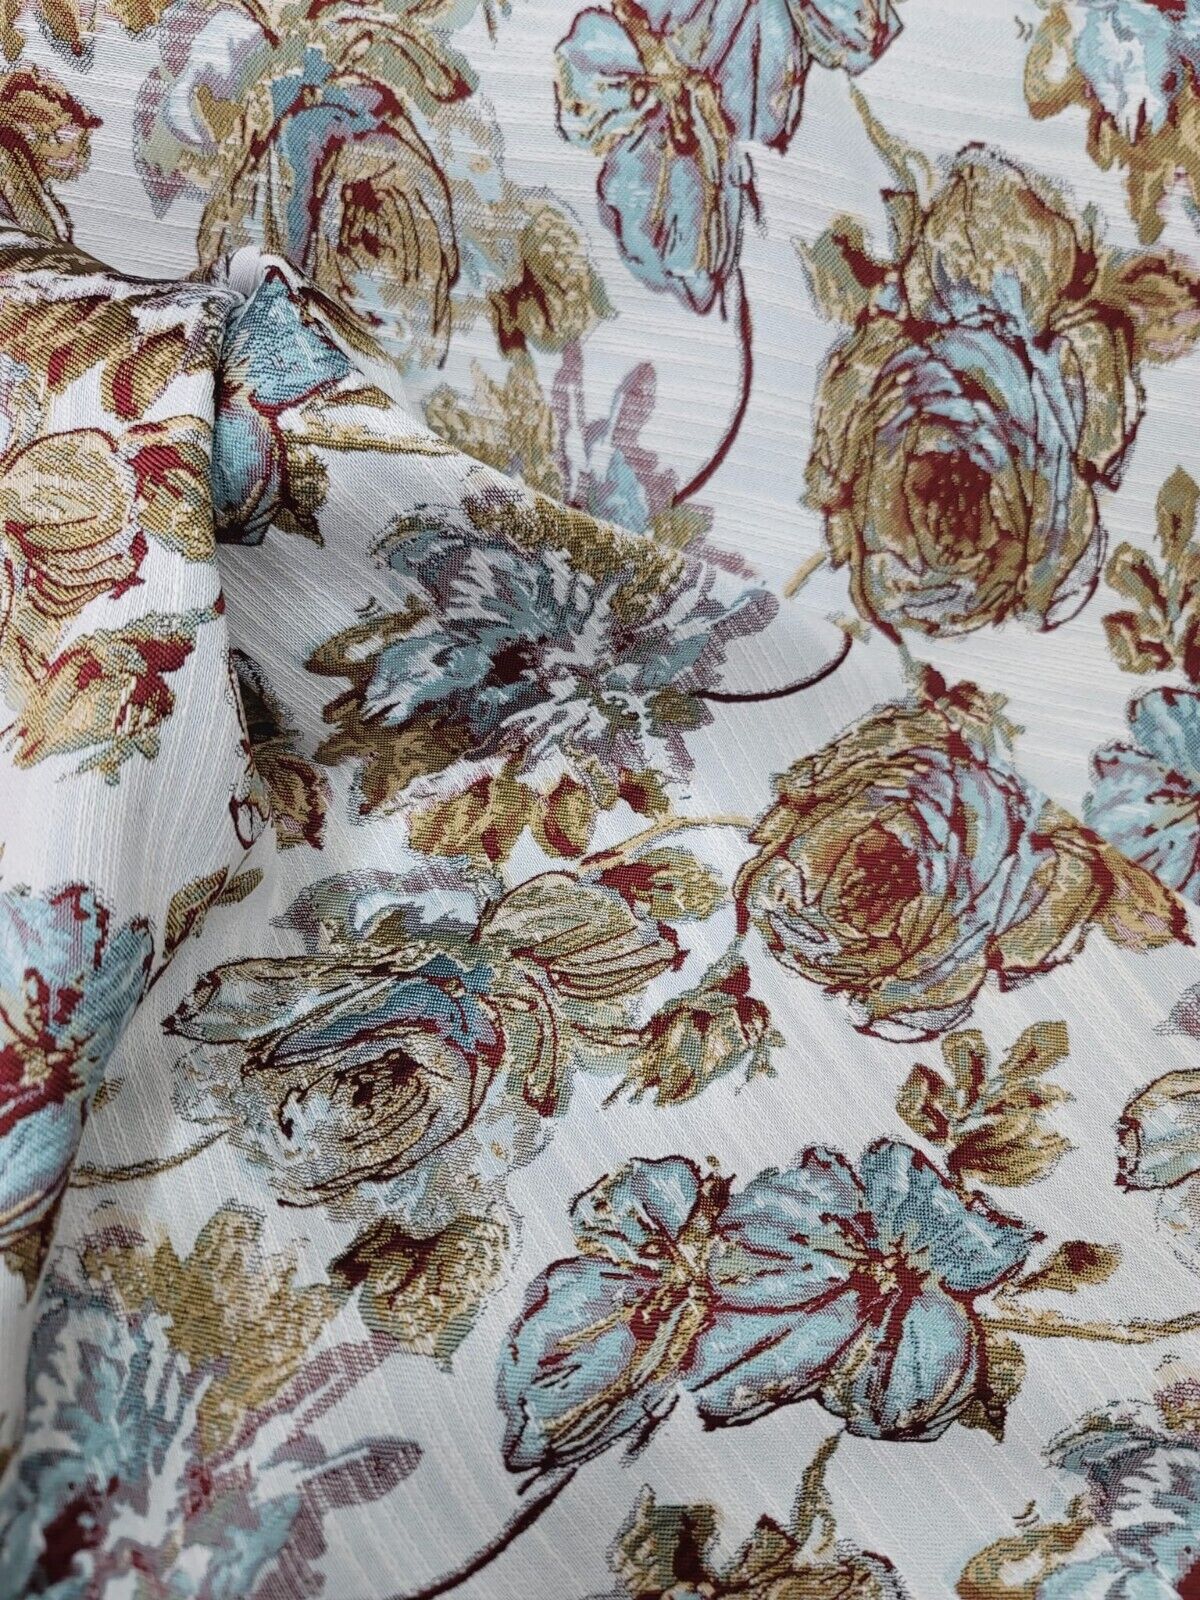 Mint Dark Gold Damask Chenille Upholstery Brocade Fabric - Sold by the Yard - Floral Pattern - 56" Width